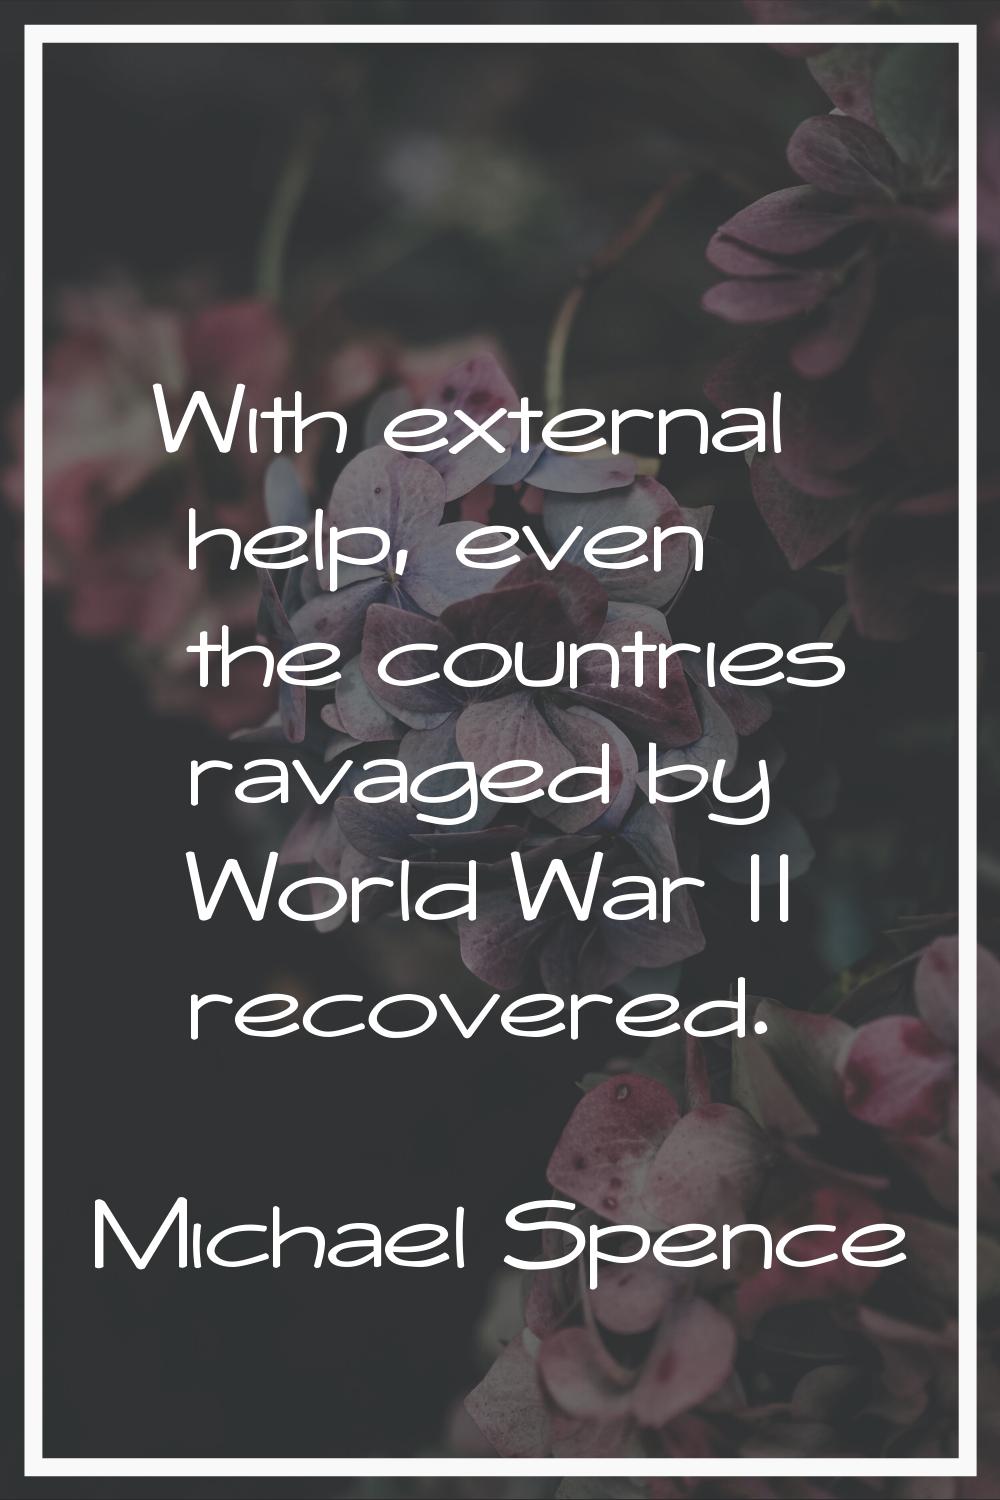 With external help, even the countries ravaged by World War II recovered.